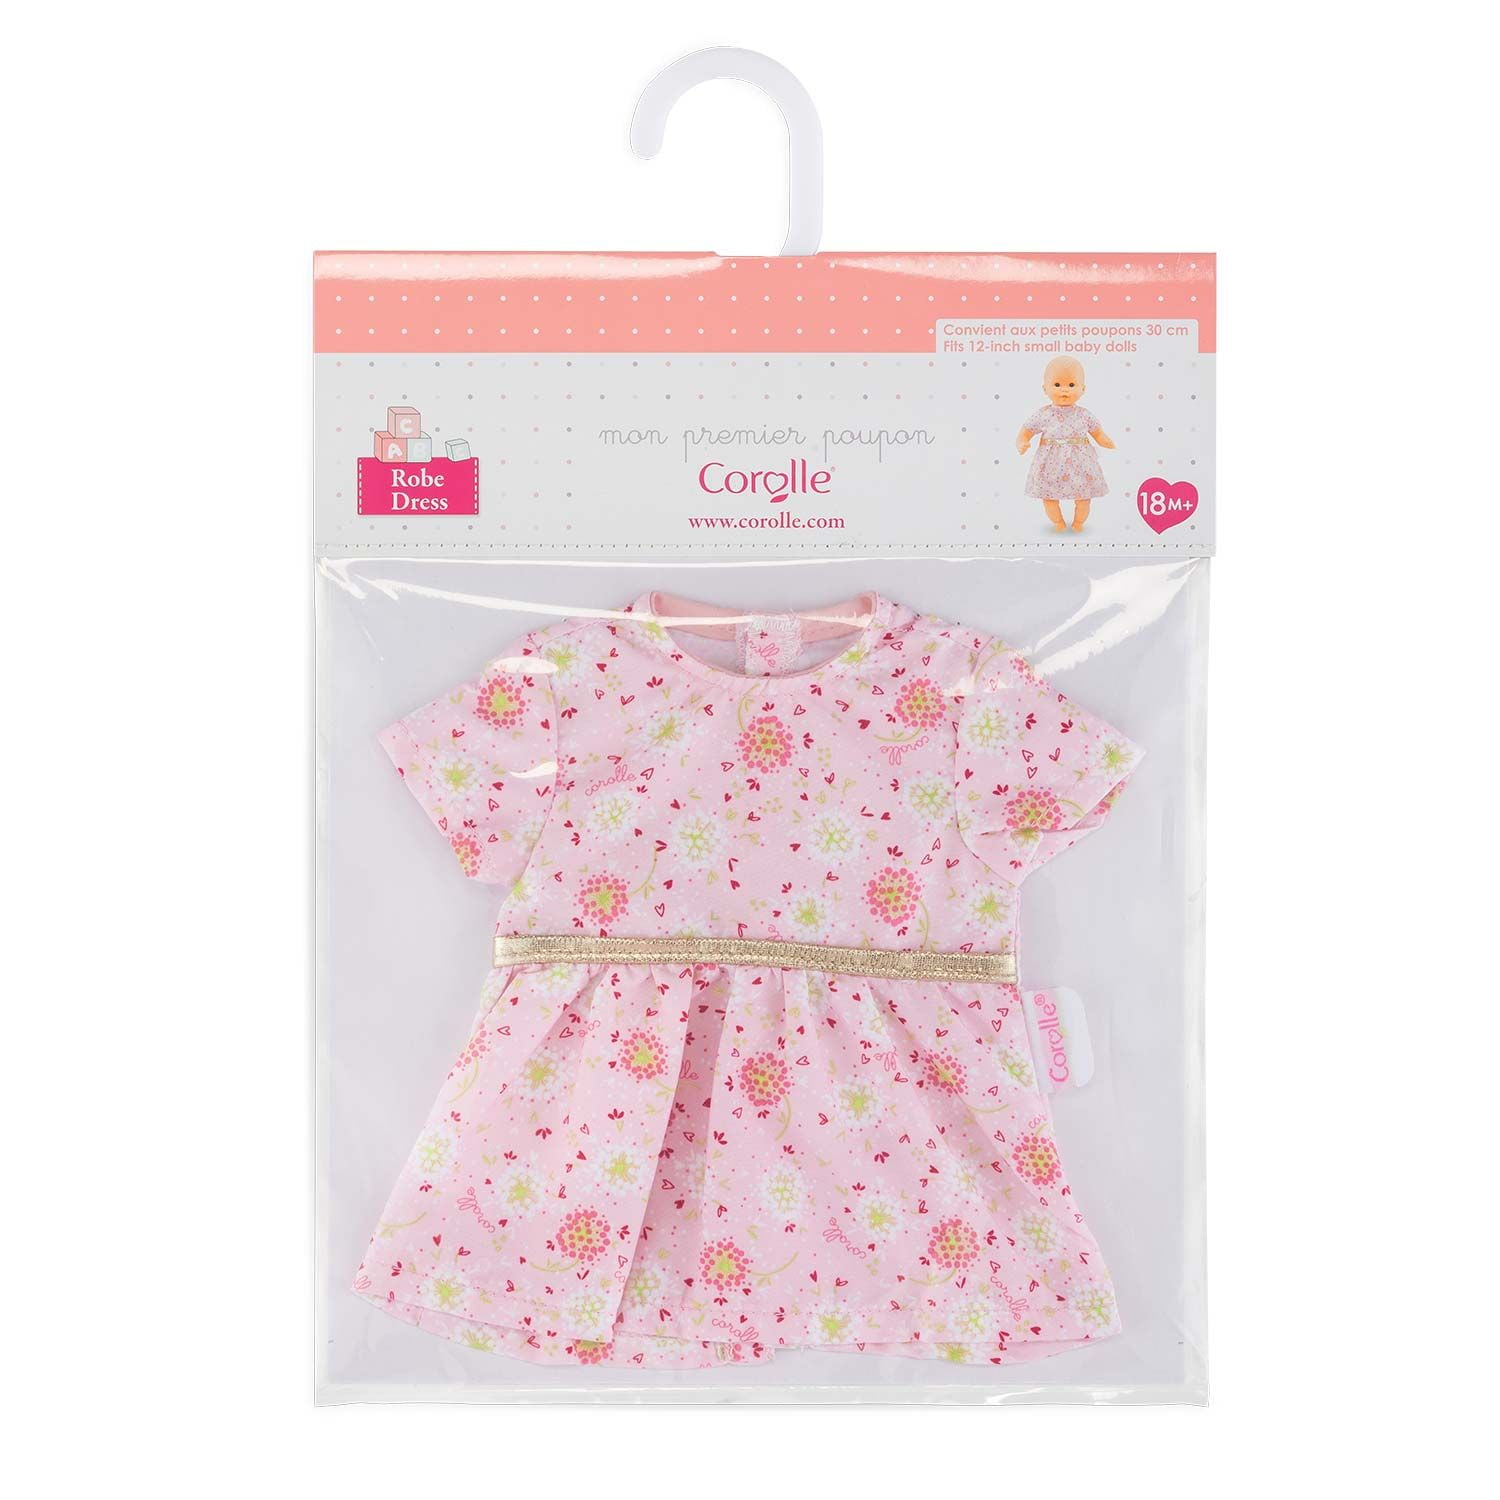 12 baby doll clothes